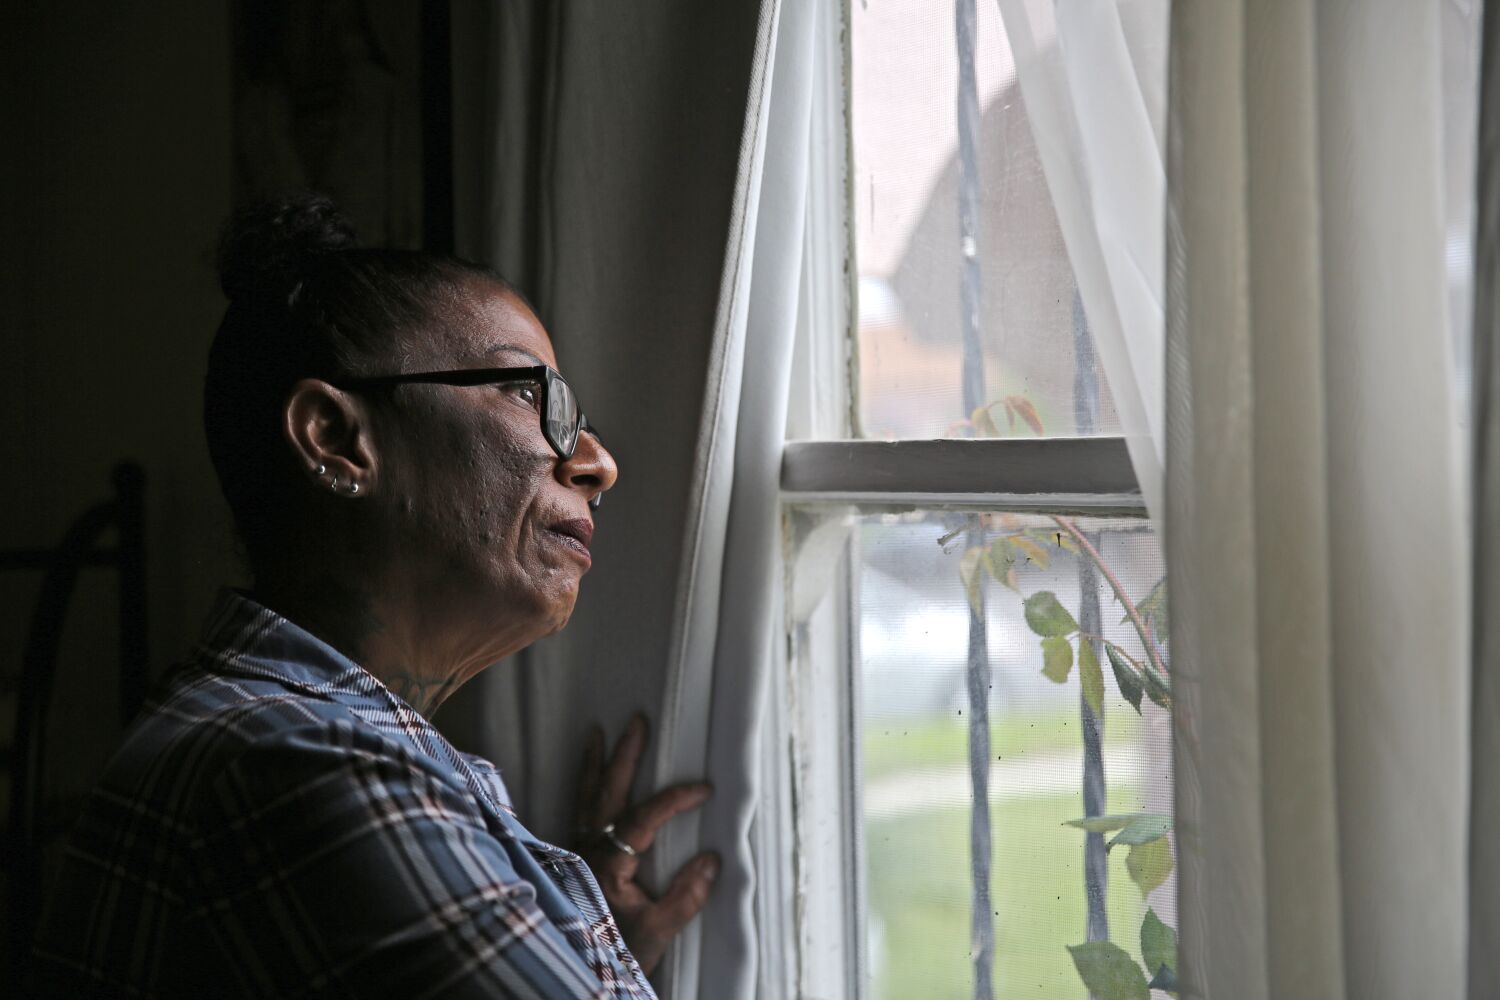 For women ex-prisoners, food insecurity can trigger catastrophe. Activists want more aid